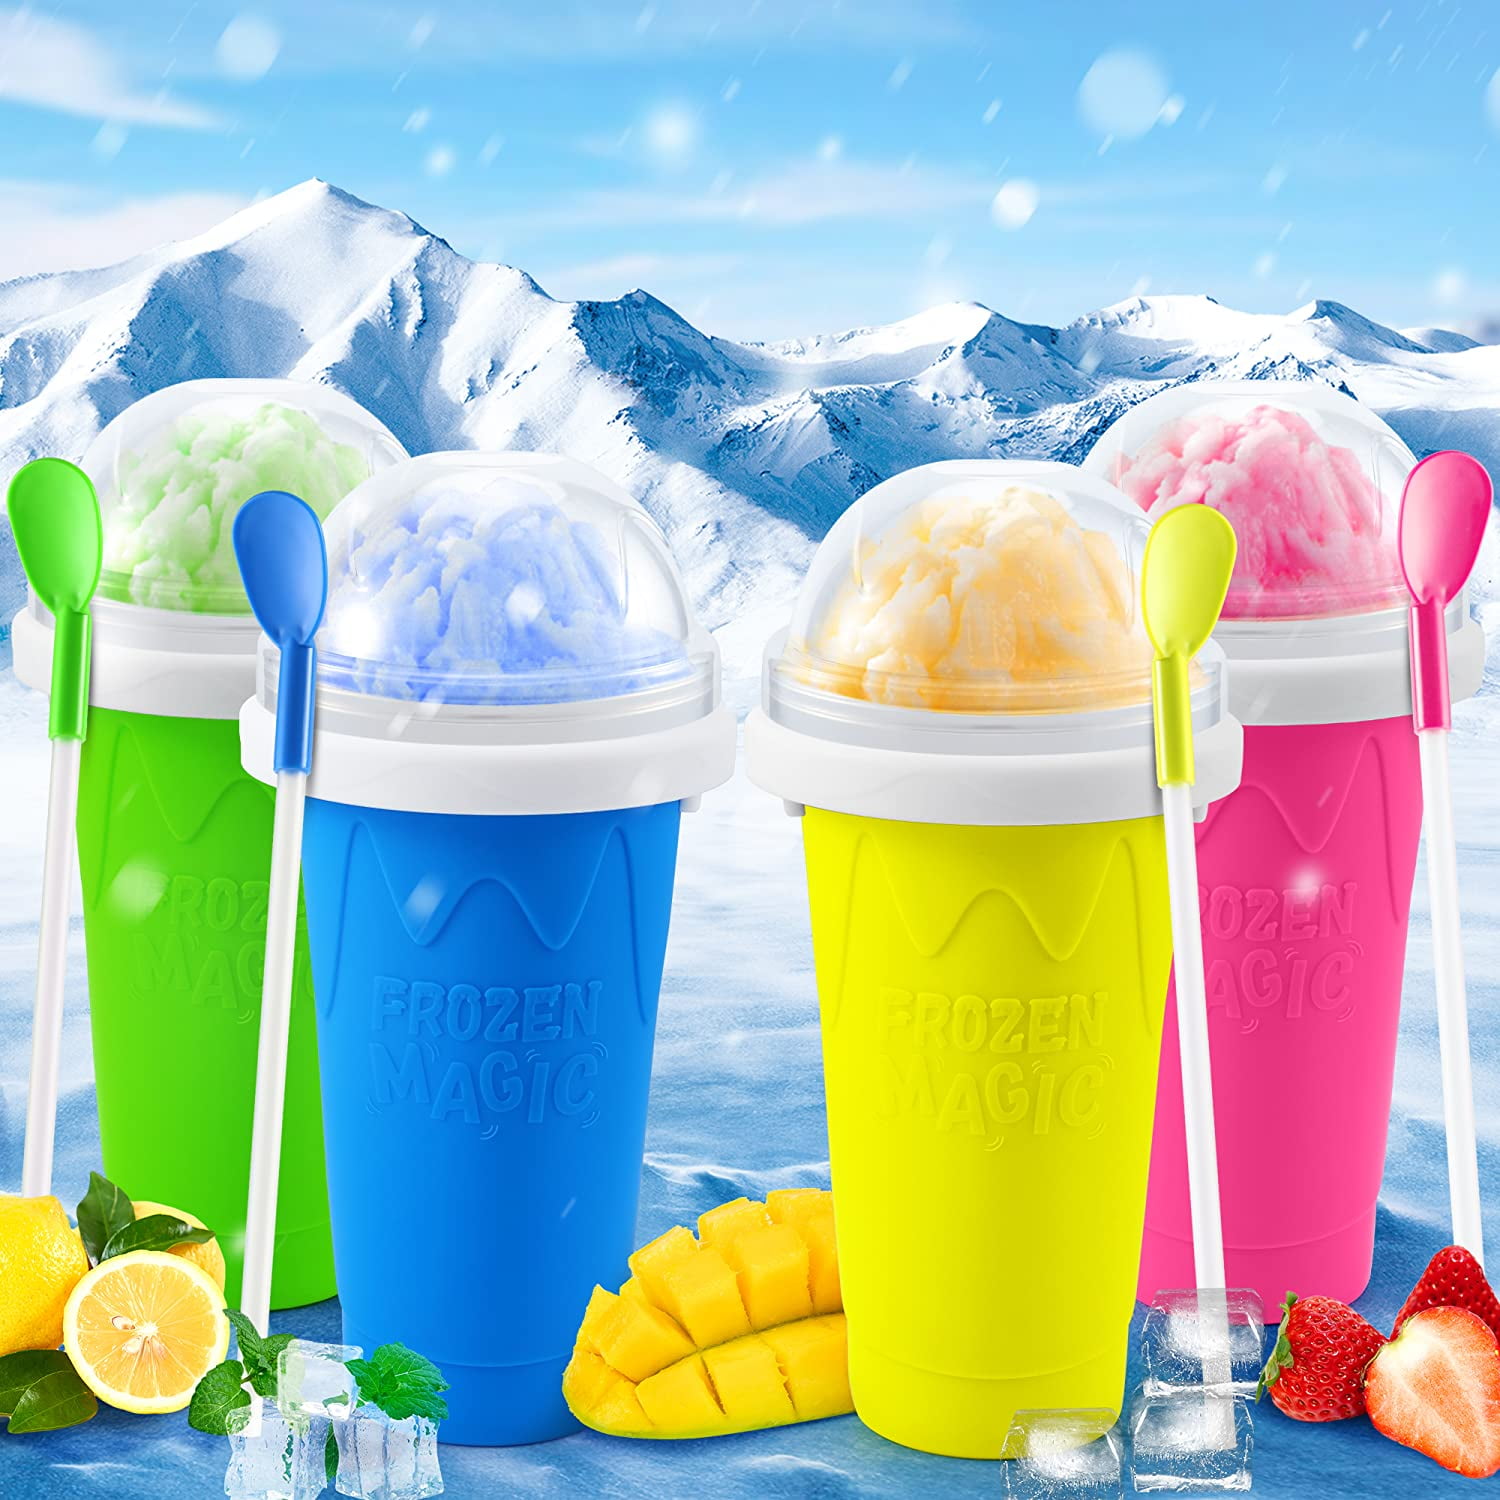 Gkcity Magic Slushy Maker Squeeze Cup Slushie Maker, Homemade Milk Shake  Maker Cooling Cup Squee DIY it for Children and Family 